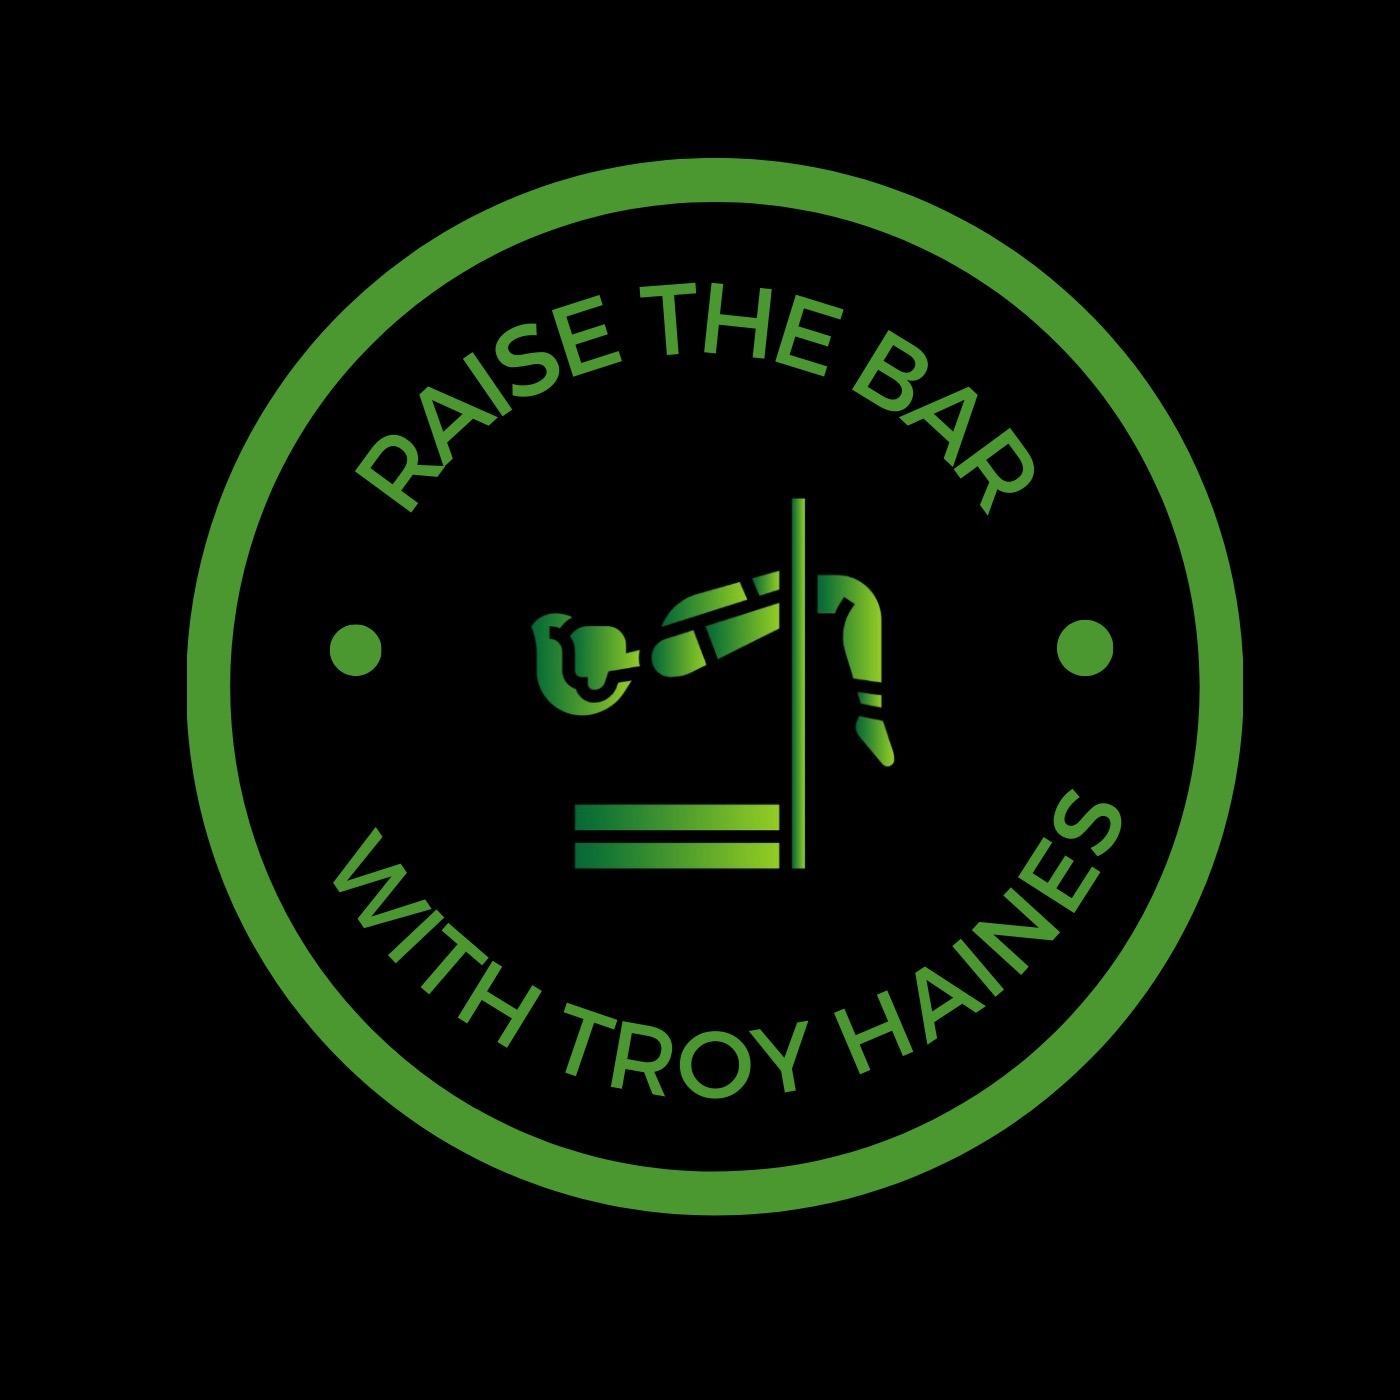 Raise the bar with Troy Haines